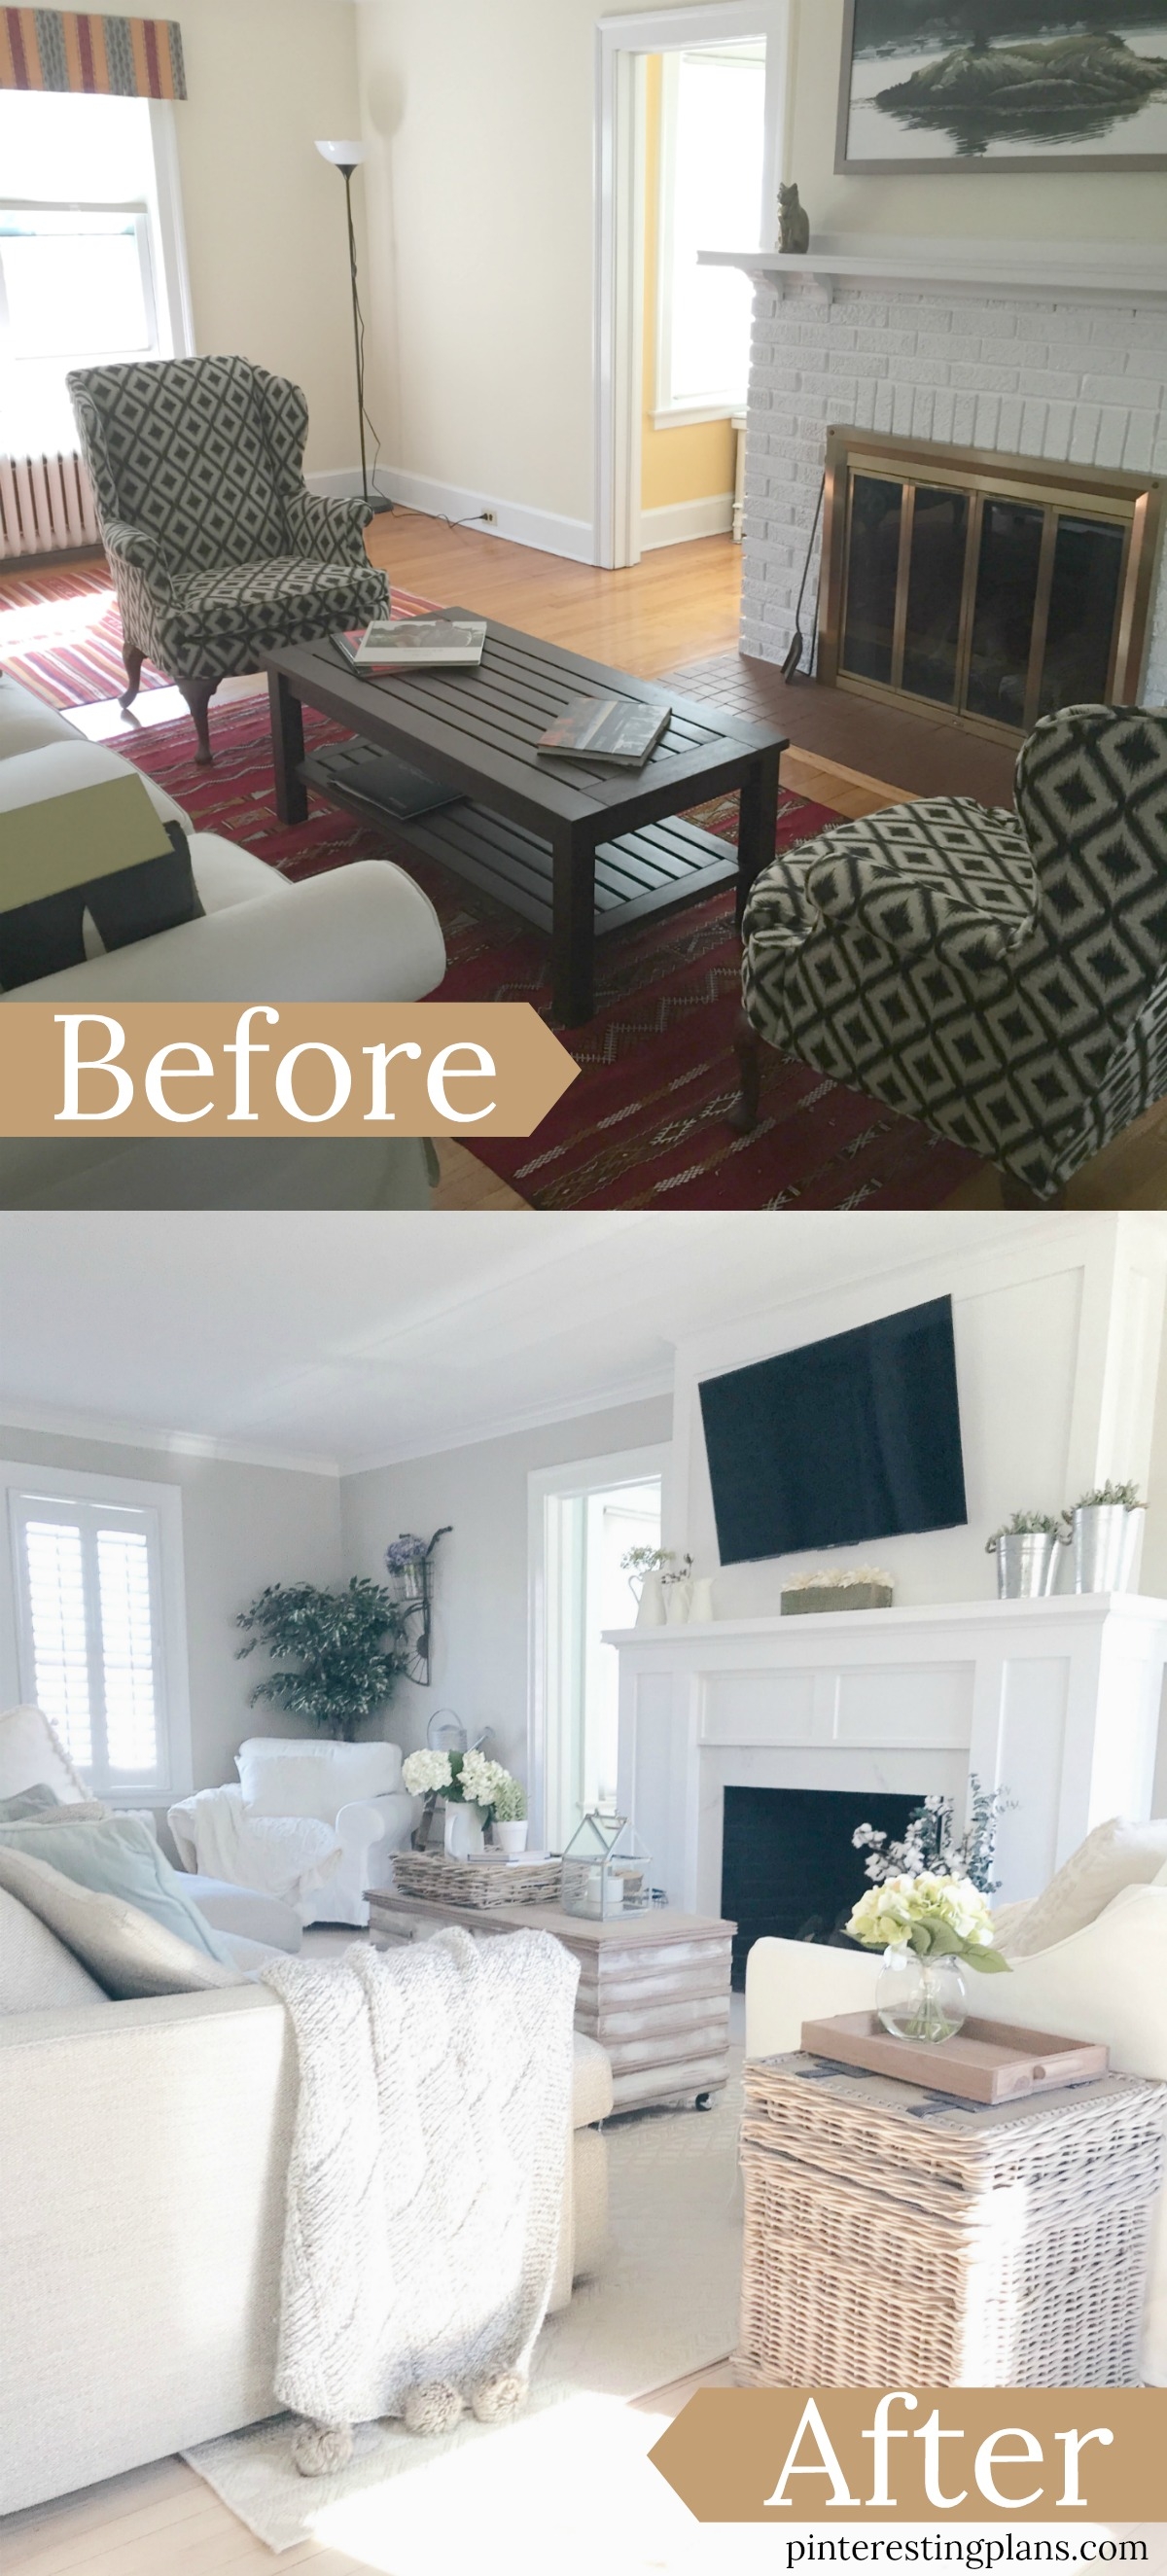 Living Room Farmhouse Chic Makeover | Pinteresting Plans a New England Style Blog